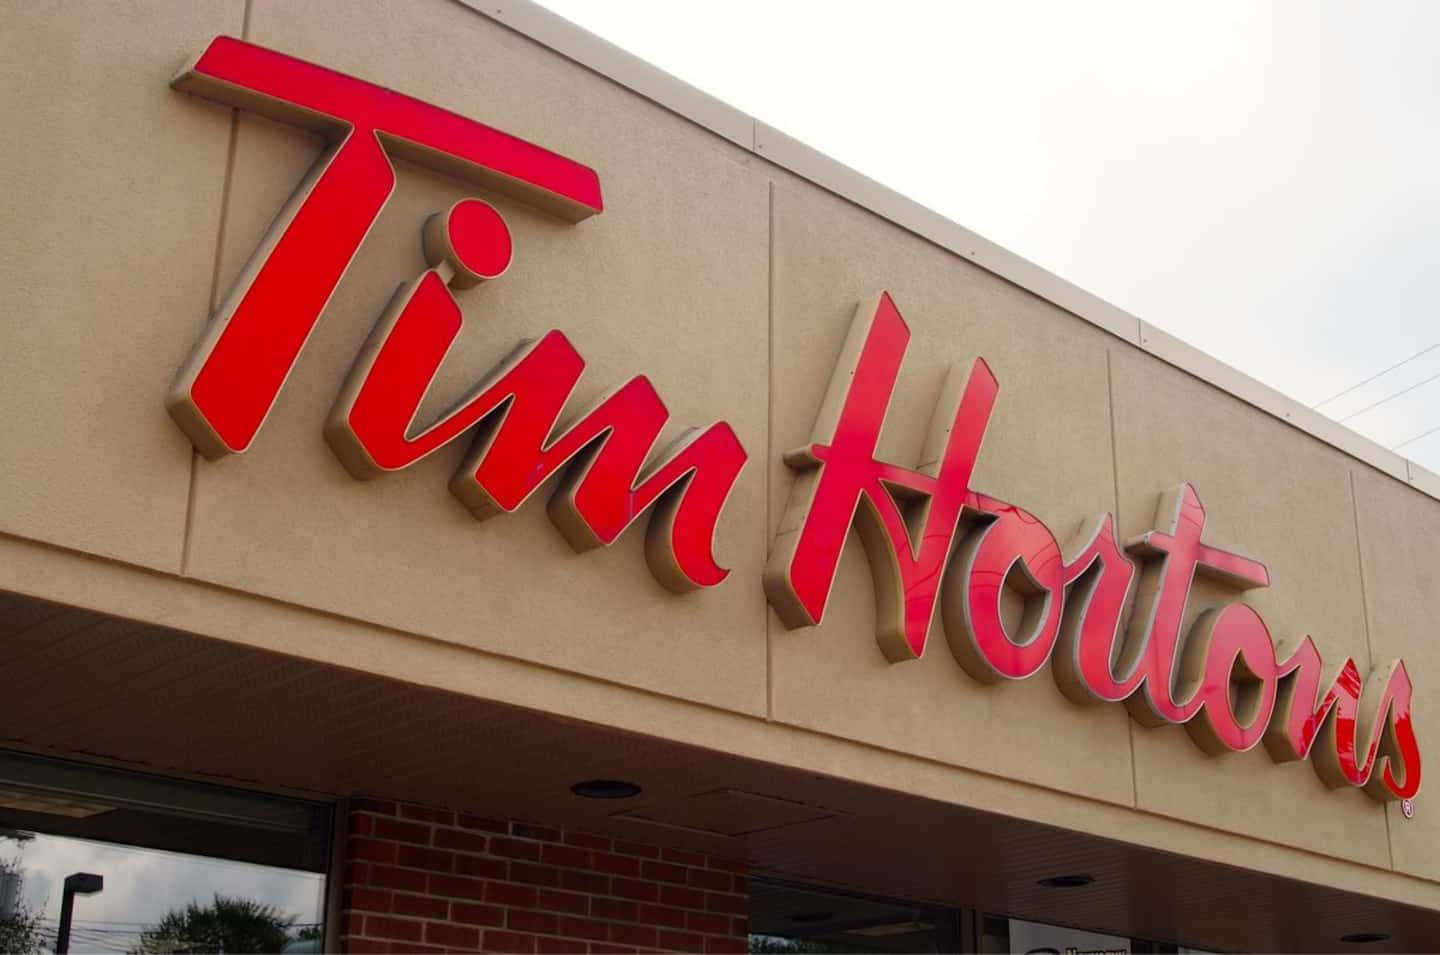 Here are the cities where Tim Hortons products were consumed the most in Canada